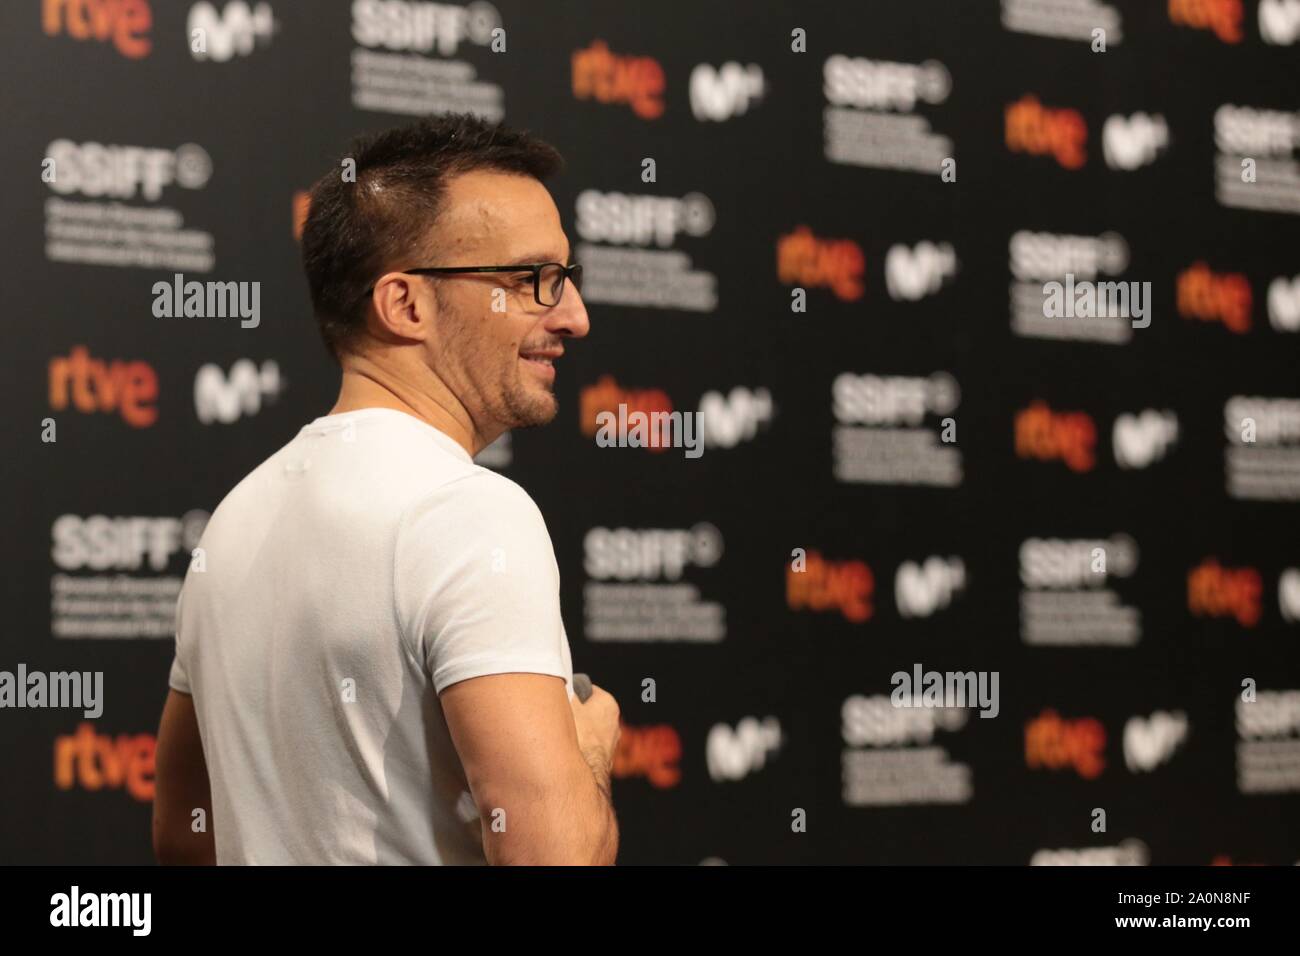 San Sebastian, Spain. 21st Sep, 2019. San Sebastian, Spain, 21/09/2019.- "While the war lasts" (Mientras dure la guerra) Spanish film of the official section in San Sebastián International Film Festival 67 editionPhotocall "While the war lasts" directed by Alejandro Amenabar. Credit: Juan Carlos Rojas/Picture Alliance. | usage worldwide/dpa/Alamy Live News Stock Photo